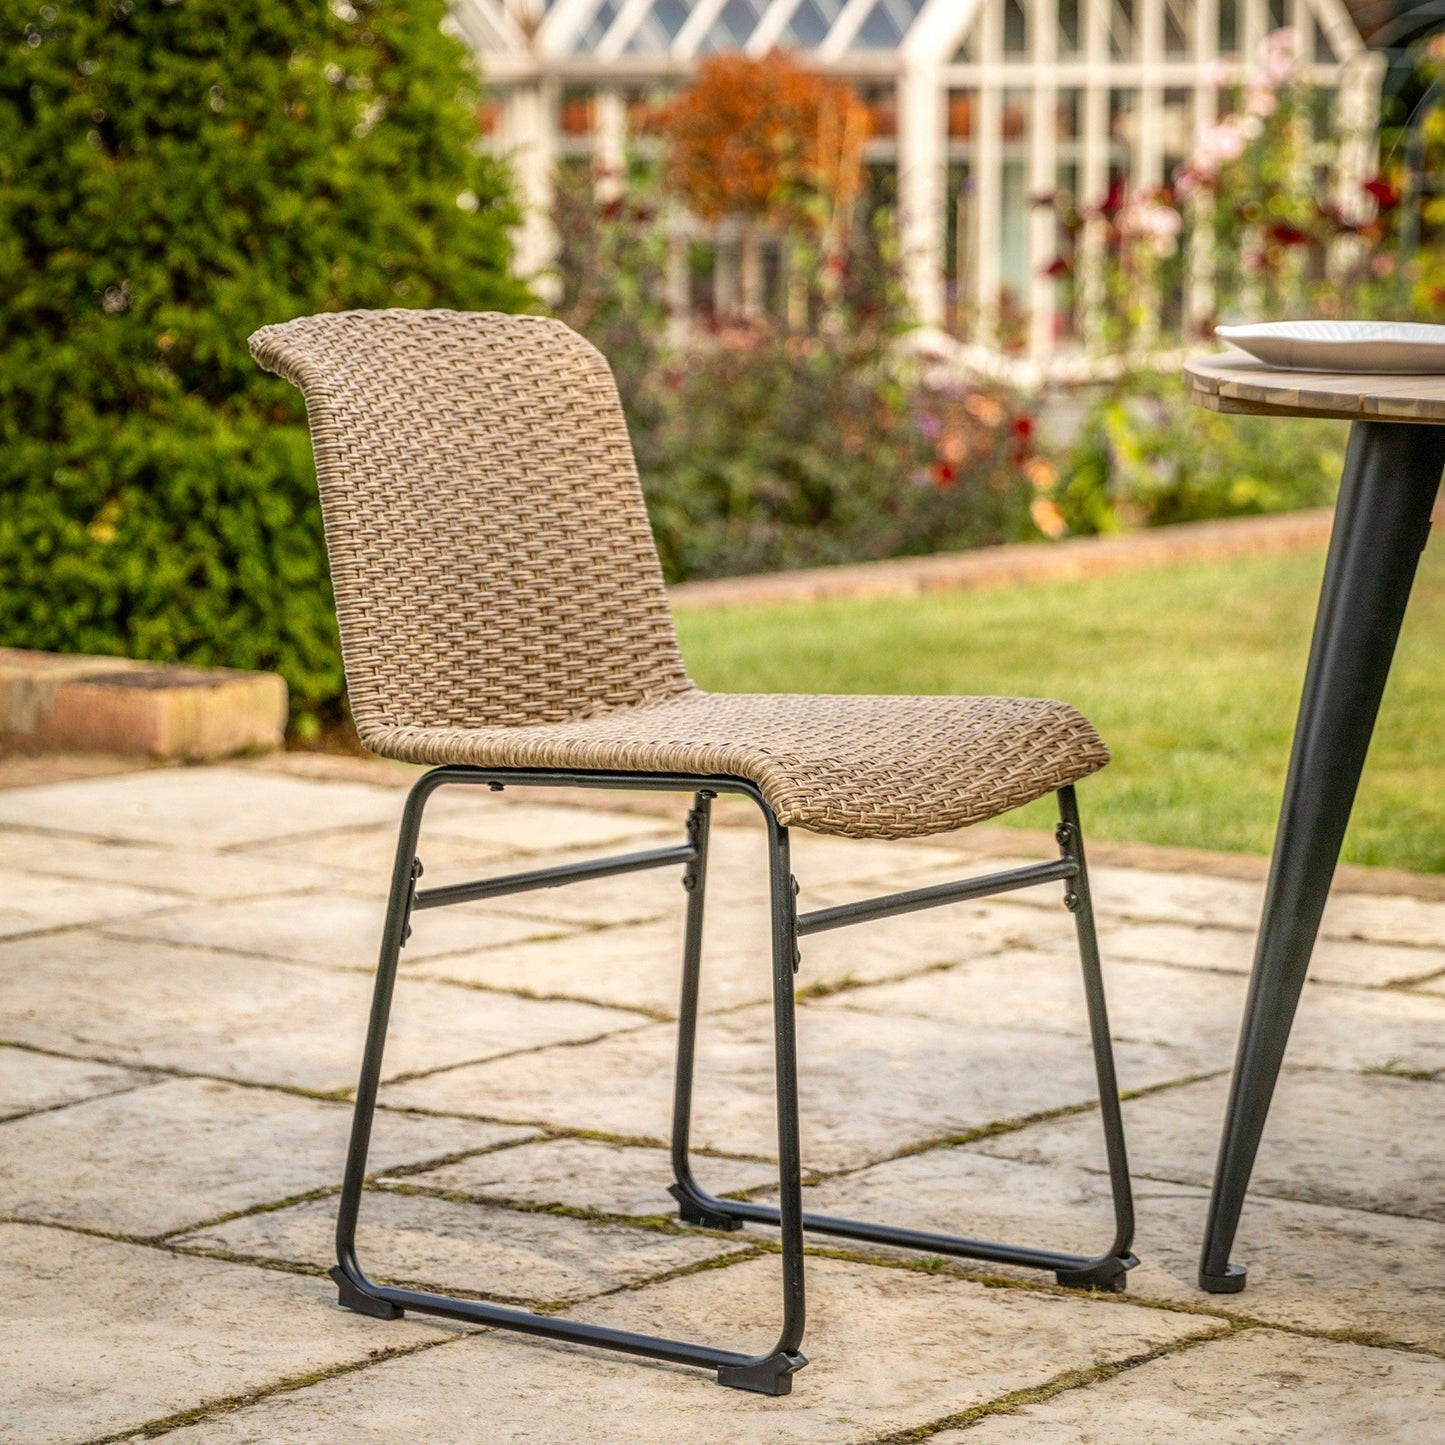 Gallery Interiors Outdoor Sapor Set of 2 Dining Chairs